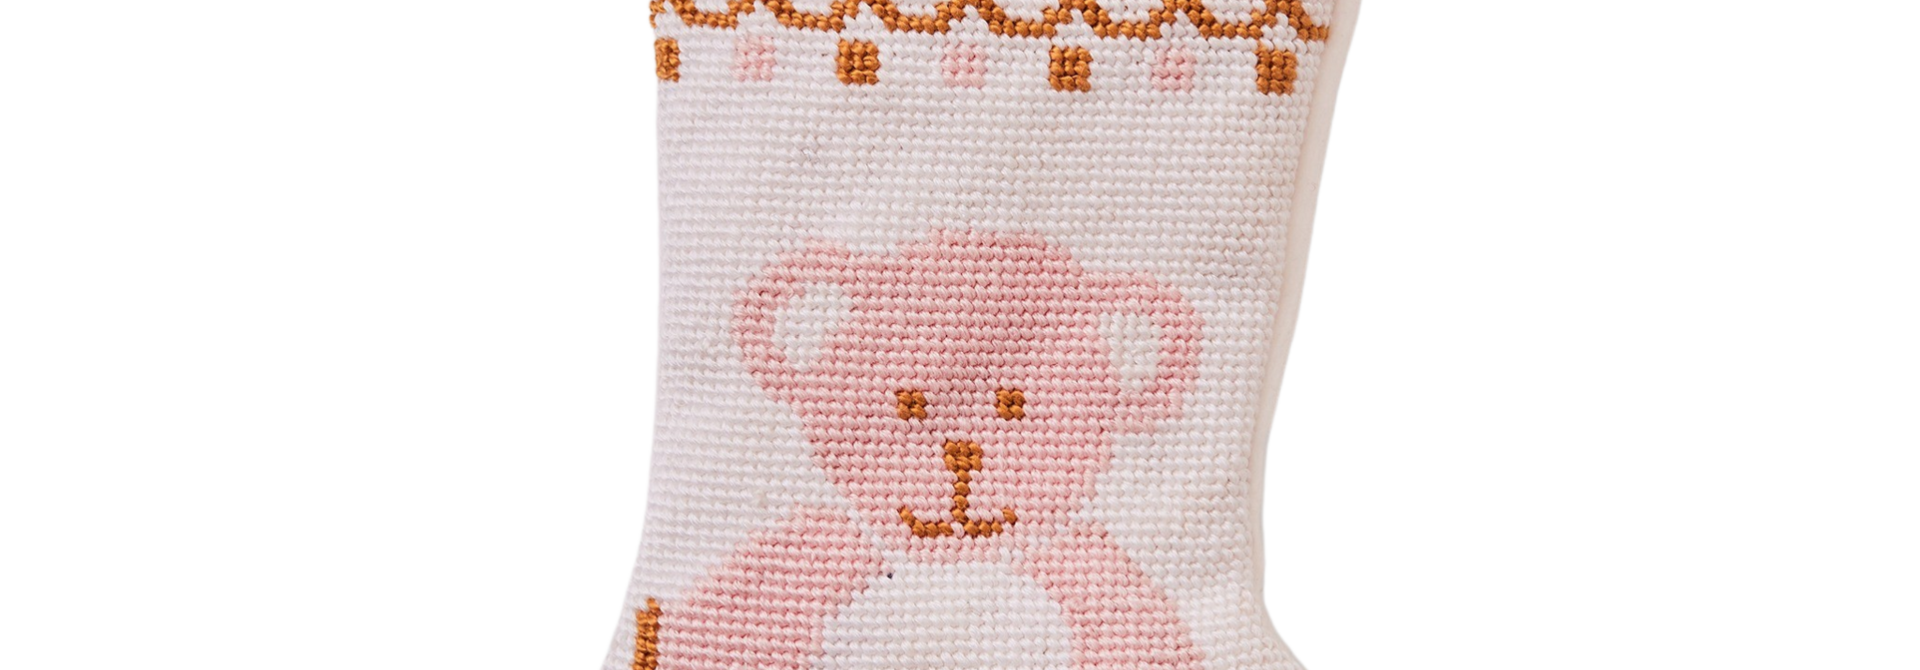 Bear-y Christmas | The Bauble Stockings Collection, Pink - 4.25 Inch x 6 Inch